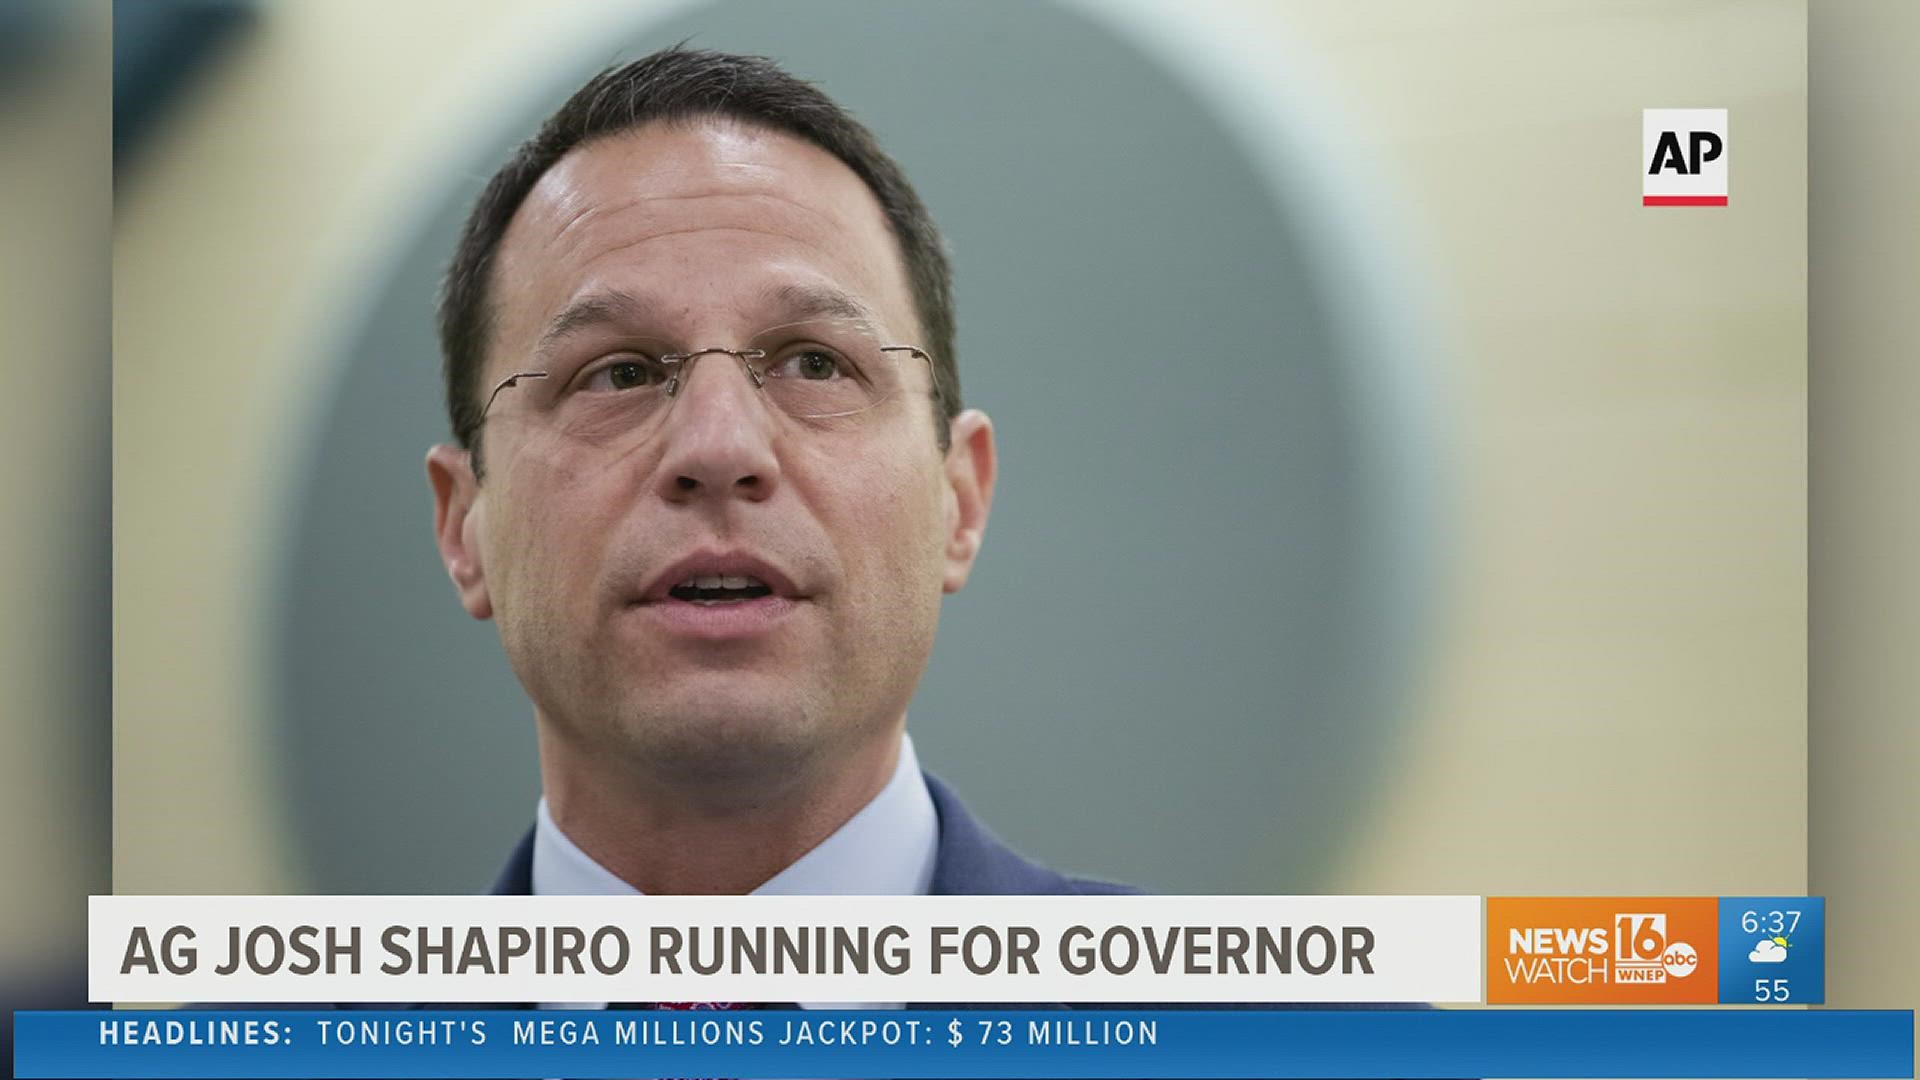 Next year's race for governor here in Pennsylvania is heating up. A well-known candidate is jumping into the contest.